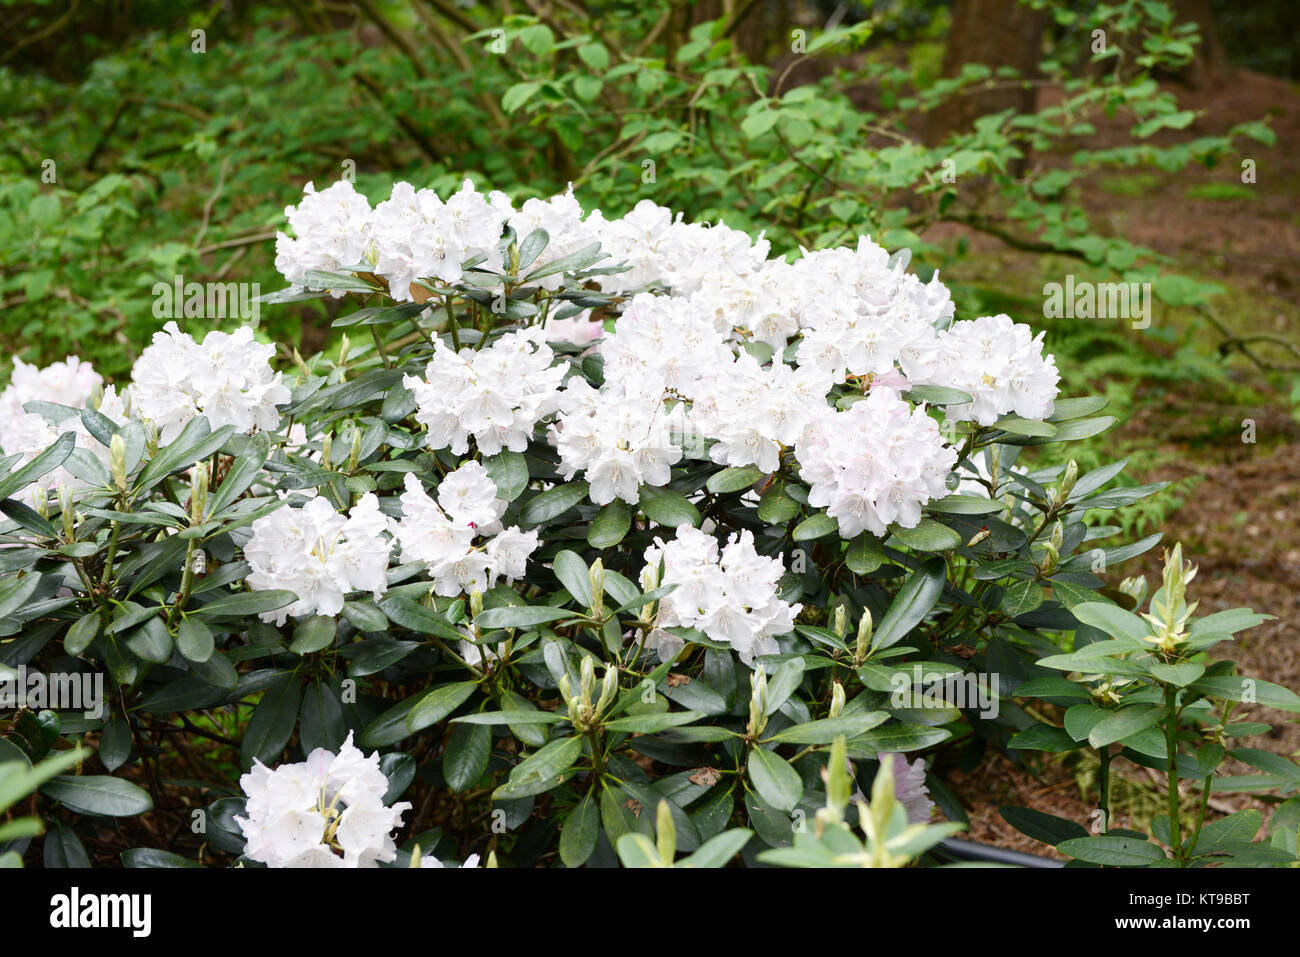 Rhododendron bush bloosom on springtime. White buds and flowerheads. Stock Photo